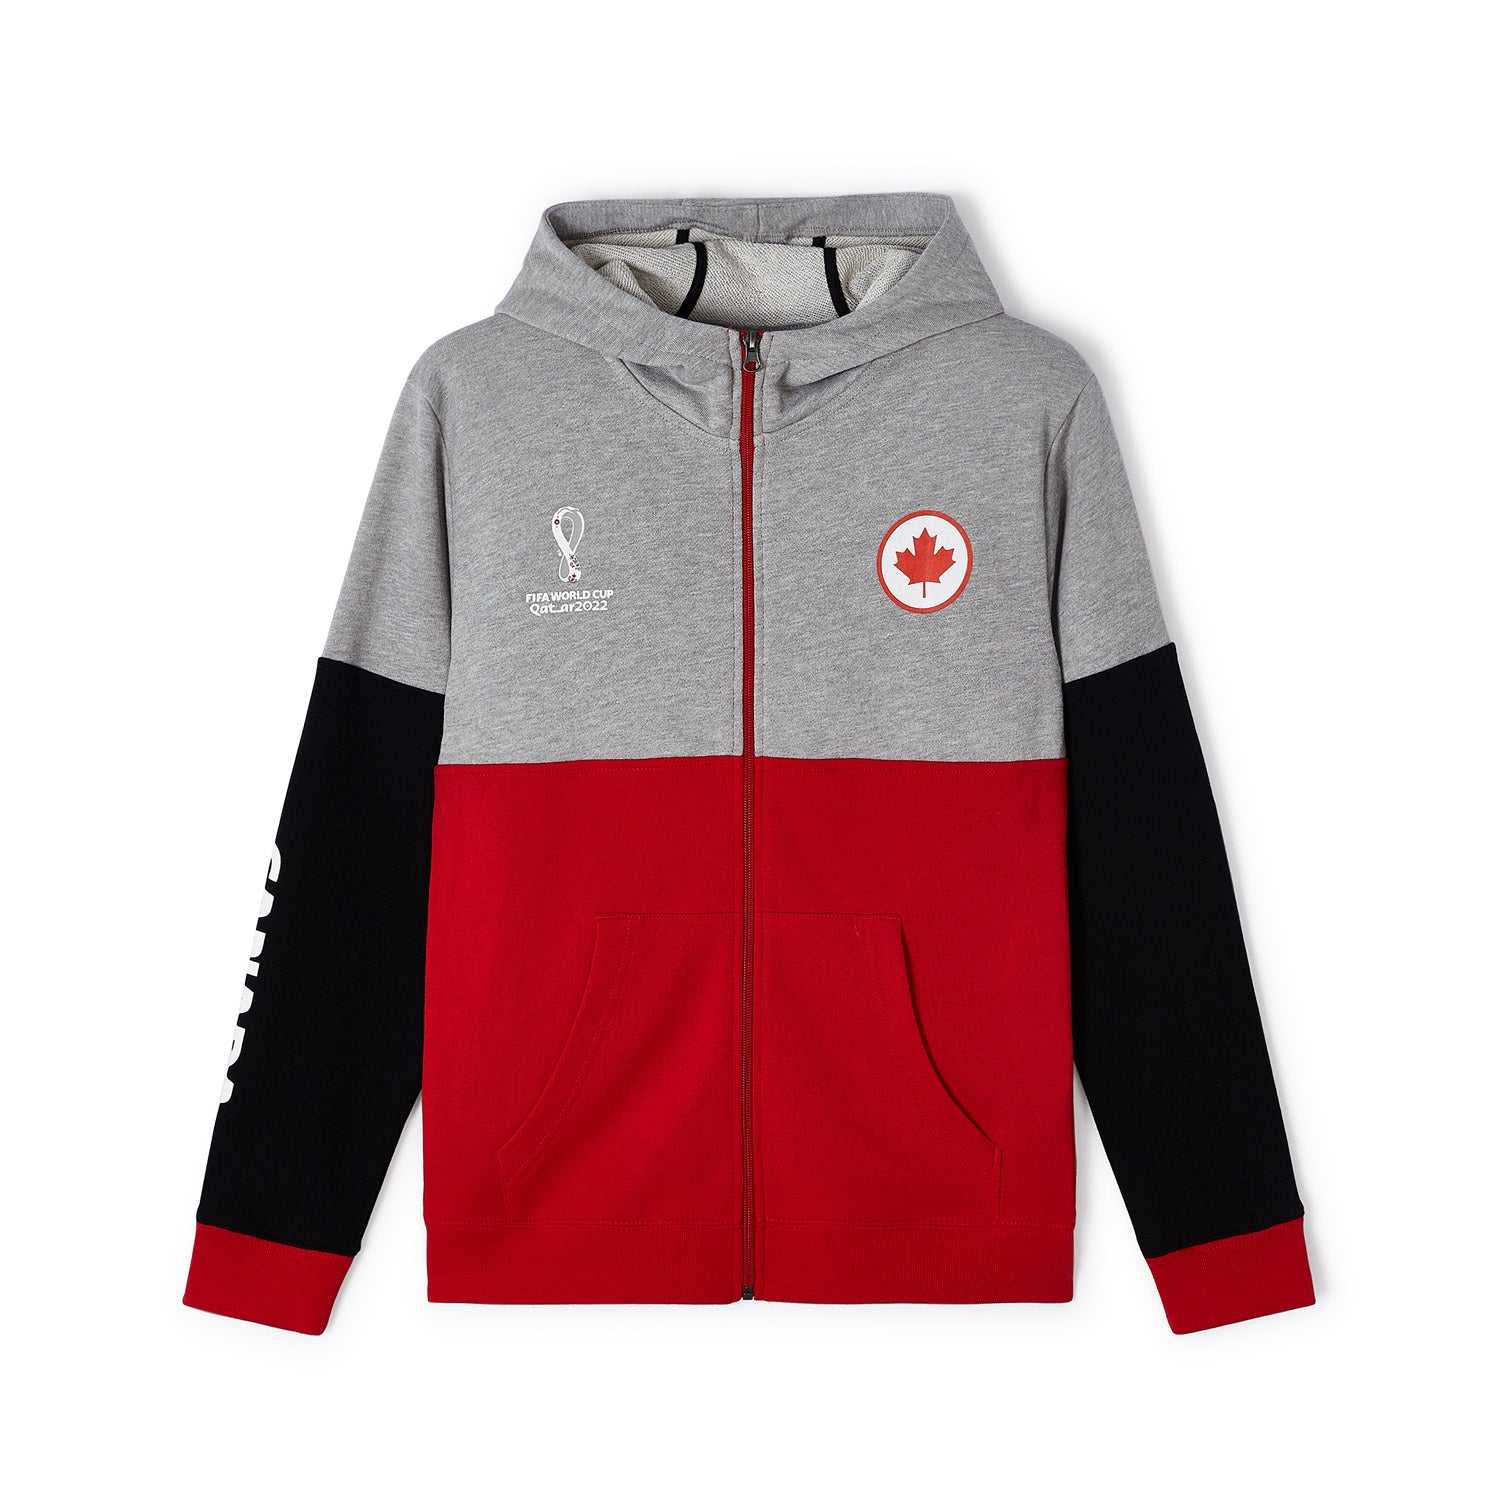 2022 World Cup Canada Red Hoodie - Youth